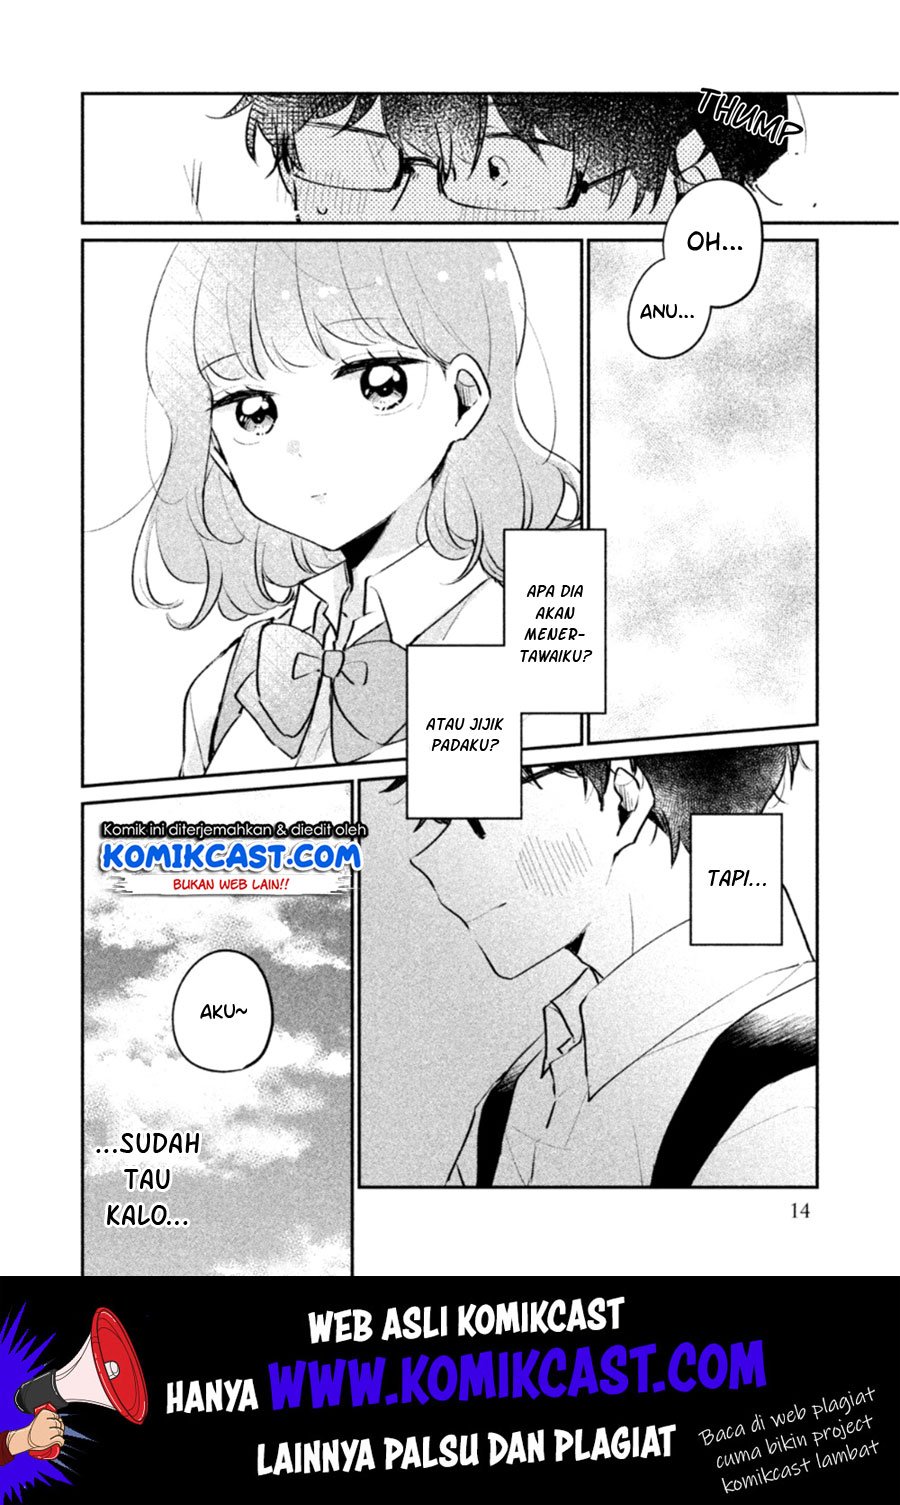 It’s Not Meguro-san’s First Time Chapter 18